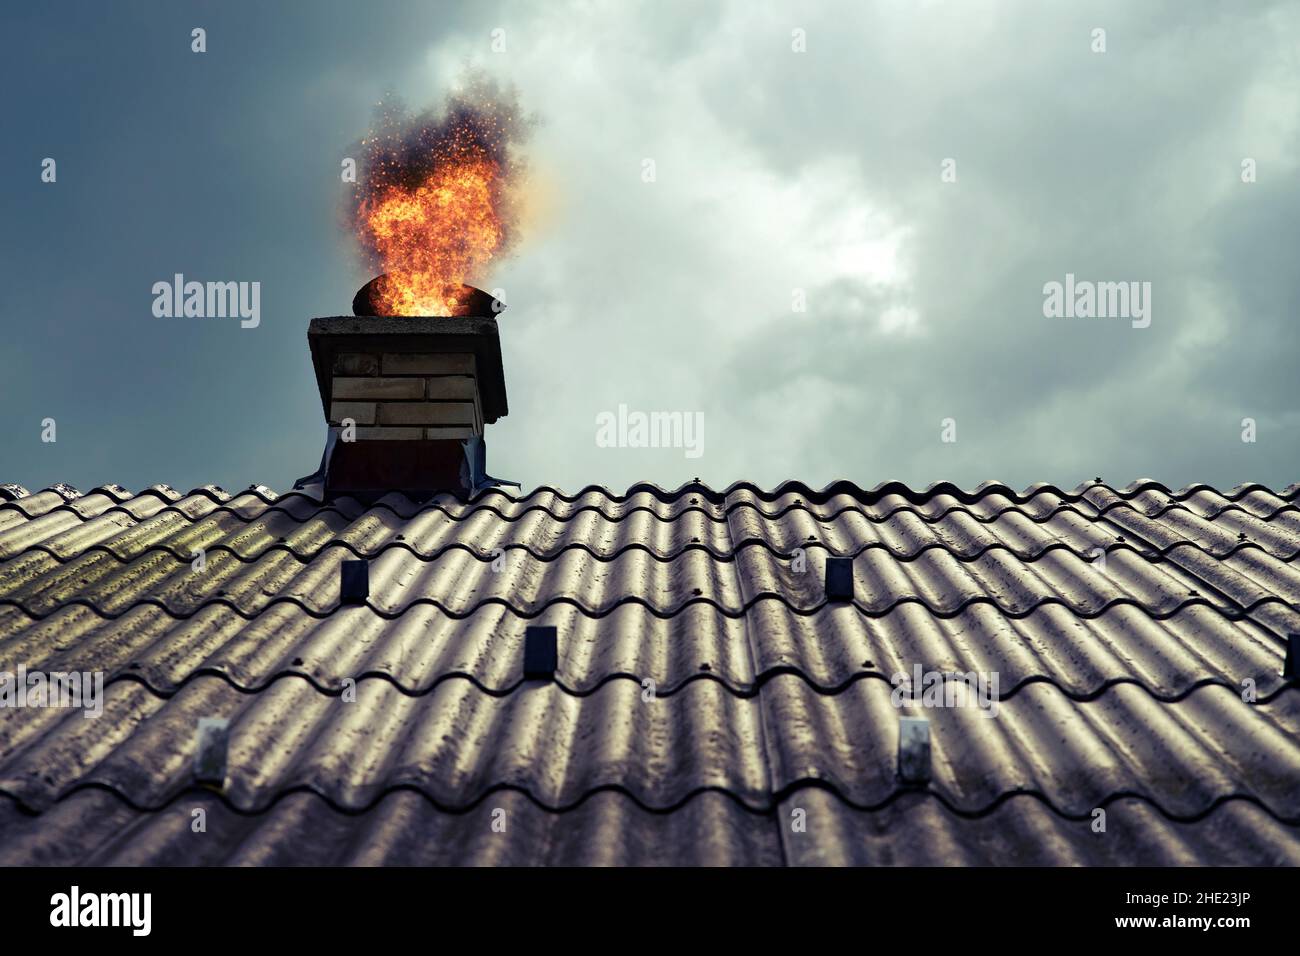 Chimney is on fire in a dramatic scene with clouds. Stock Photo